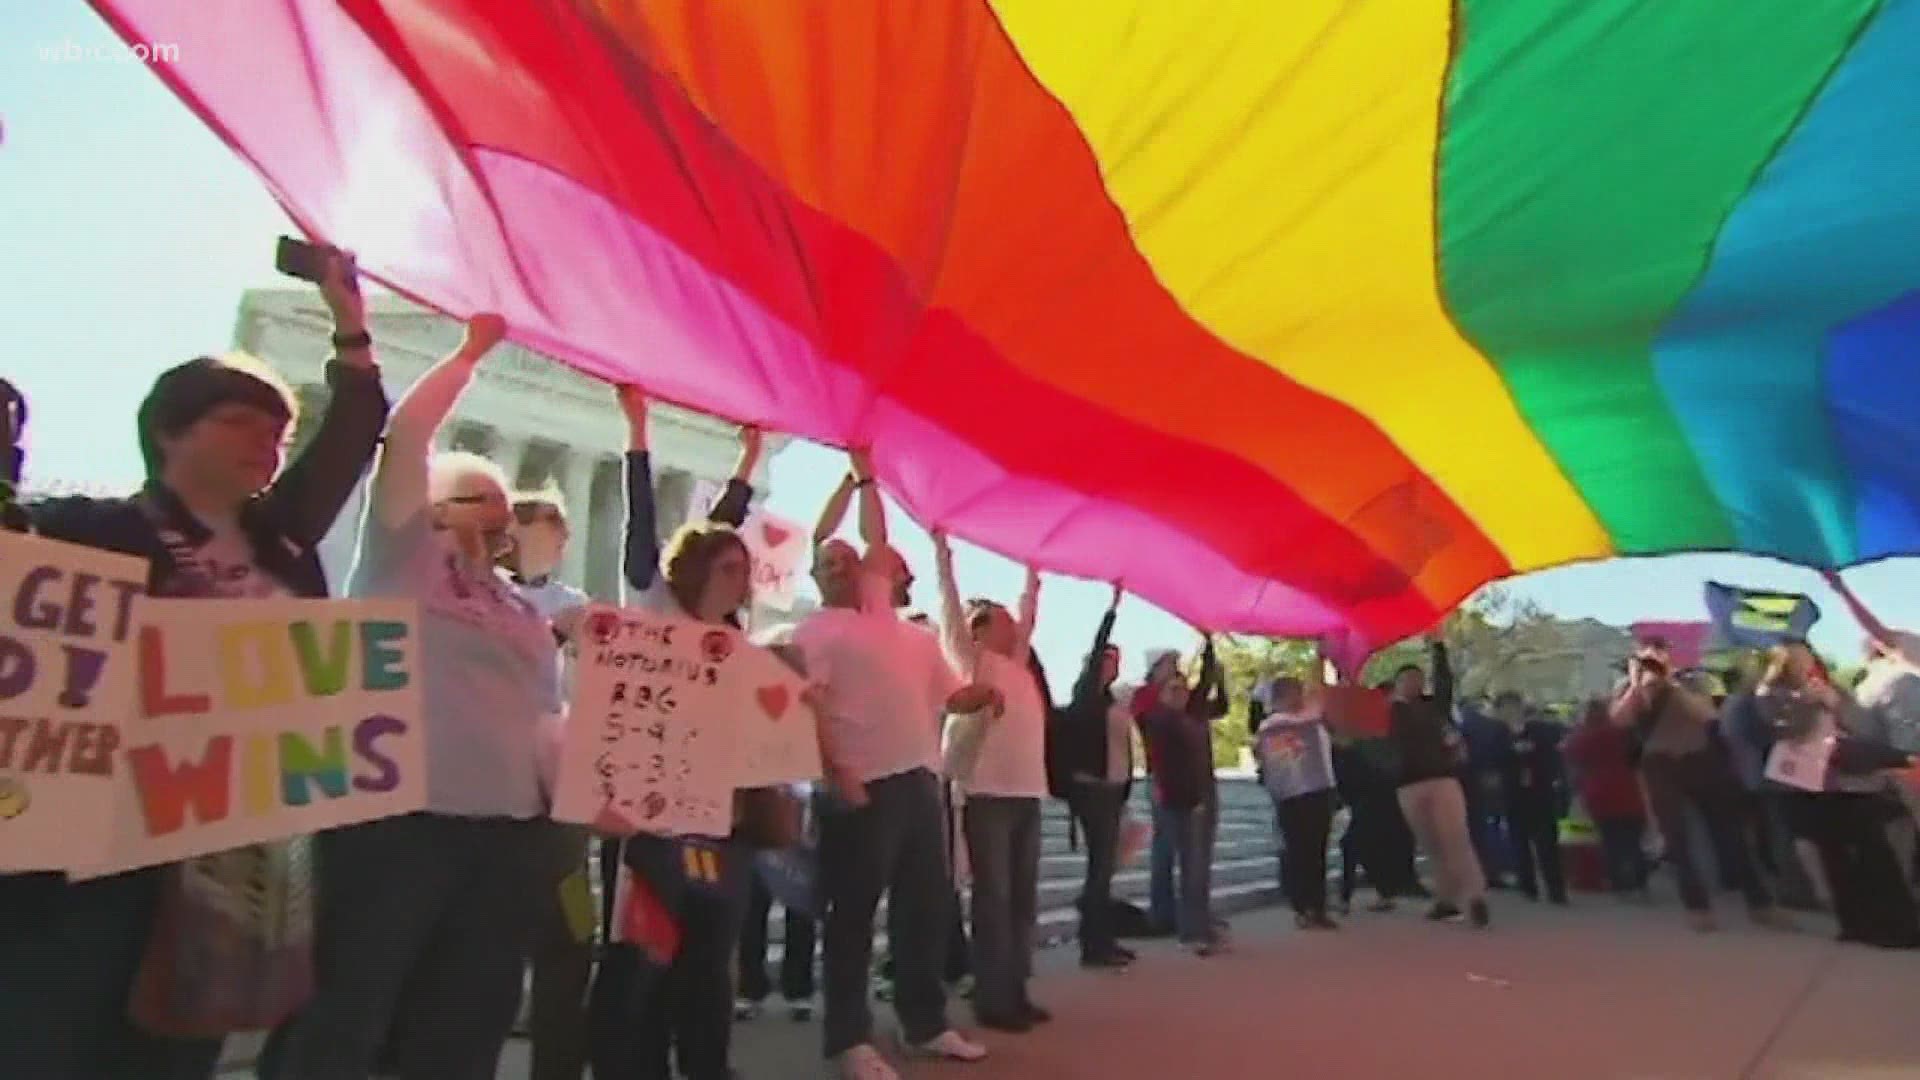 Critics say anti-gay bills in the state Legislature could censor teachers and history.